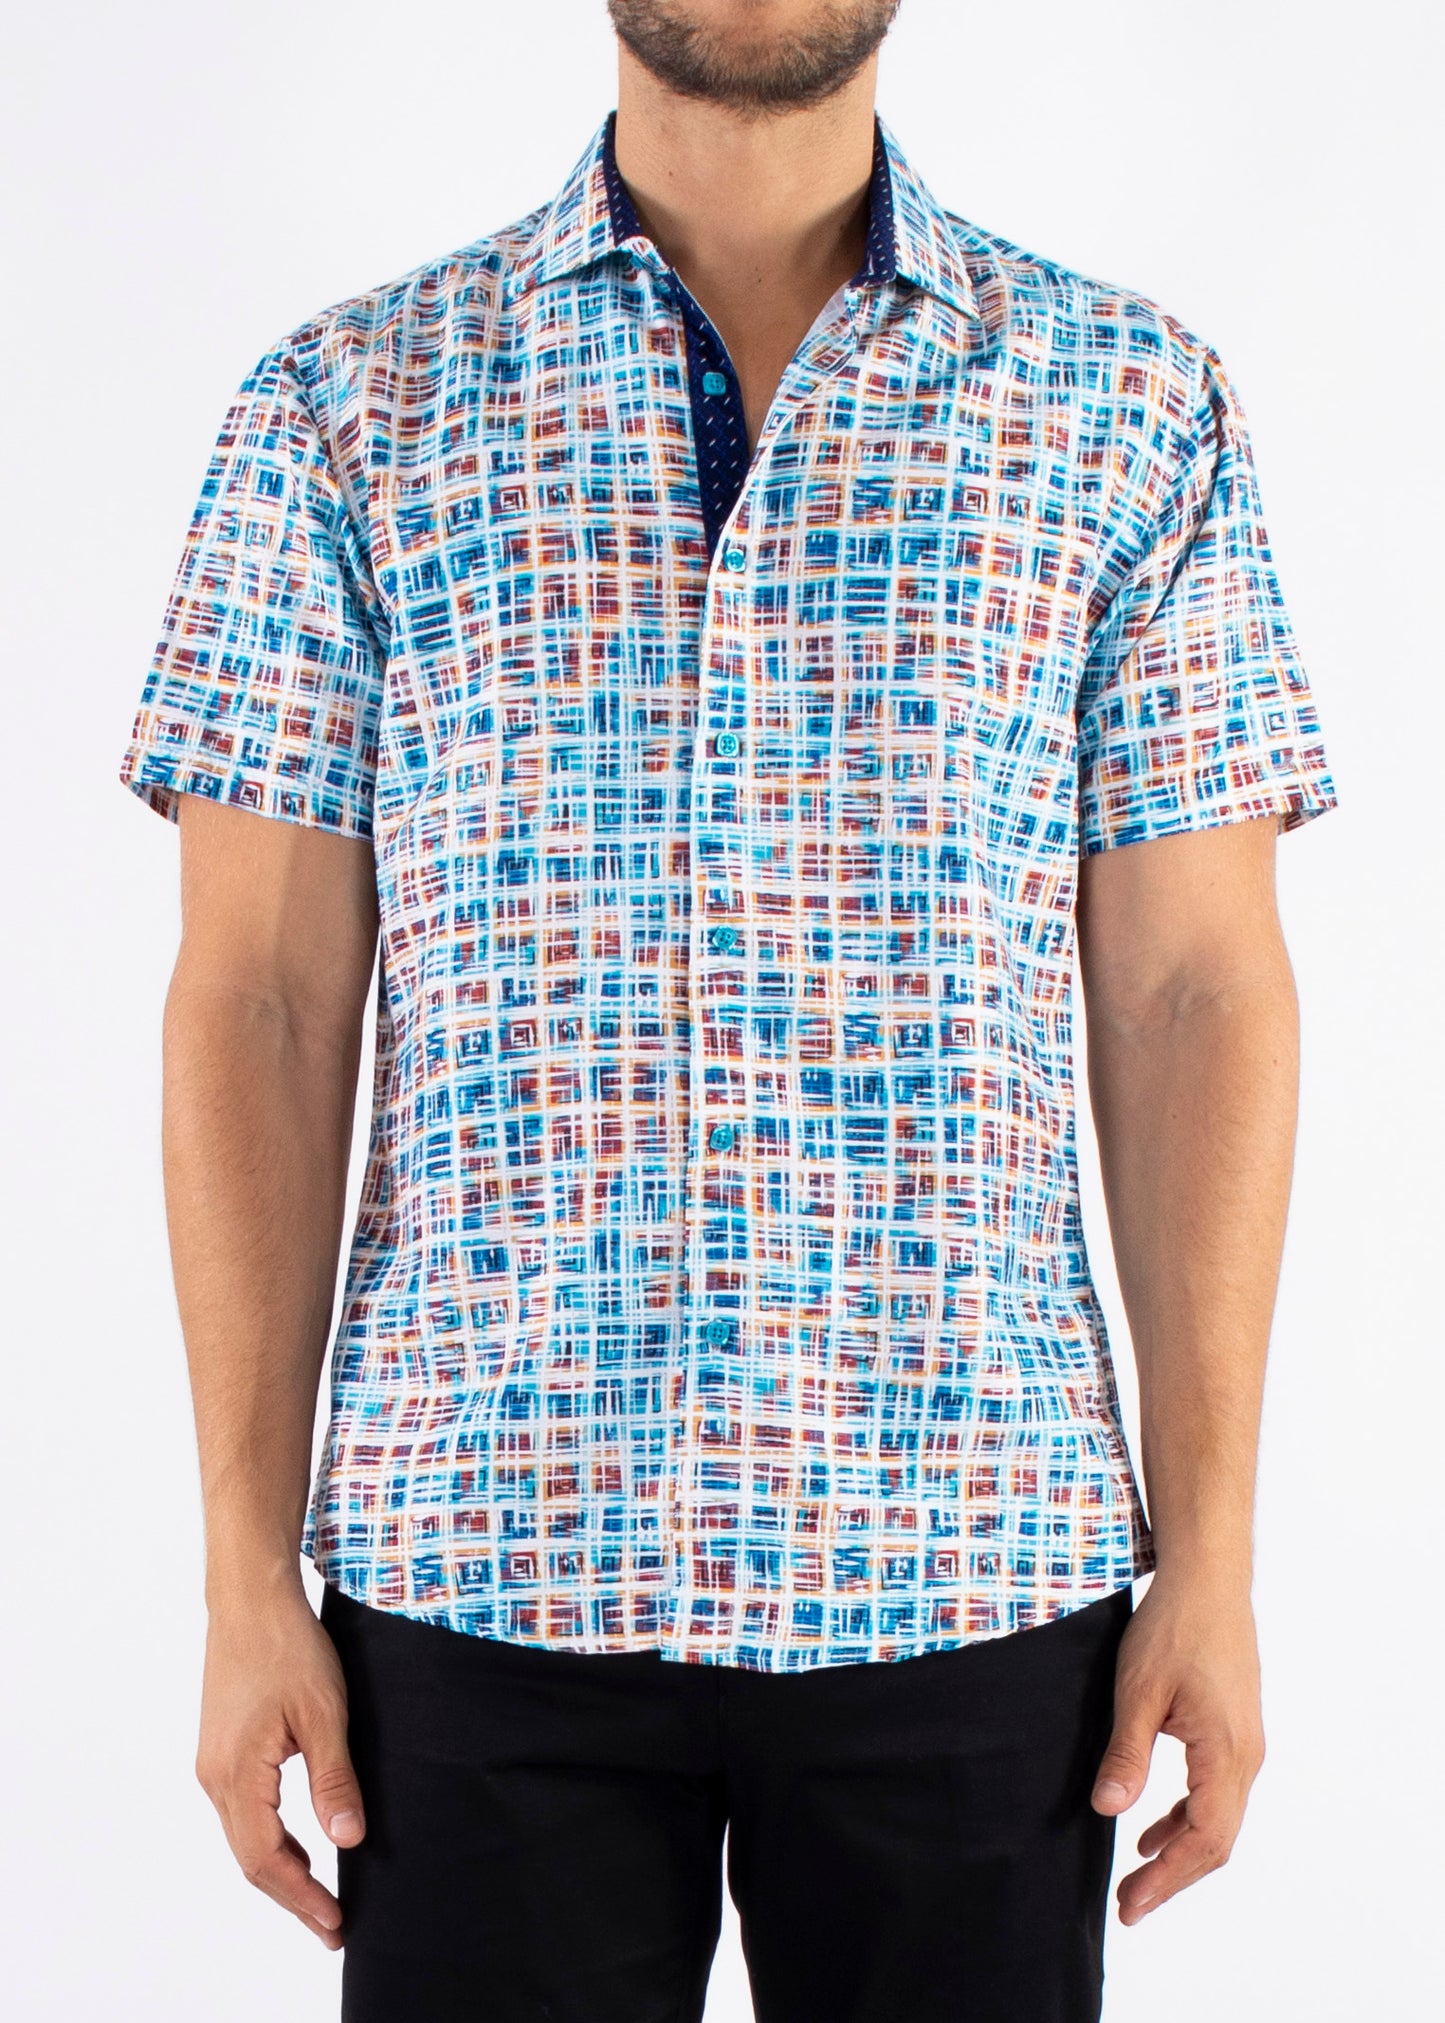 'Color square' - Button Up Short Sleeve Shirt